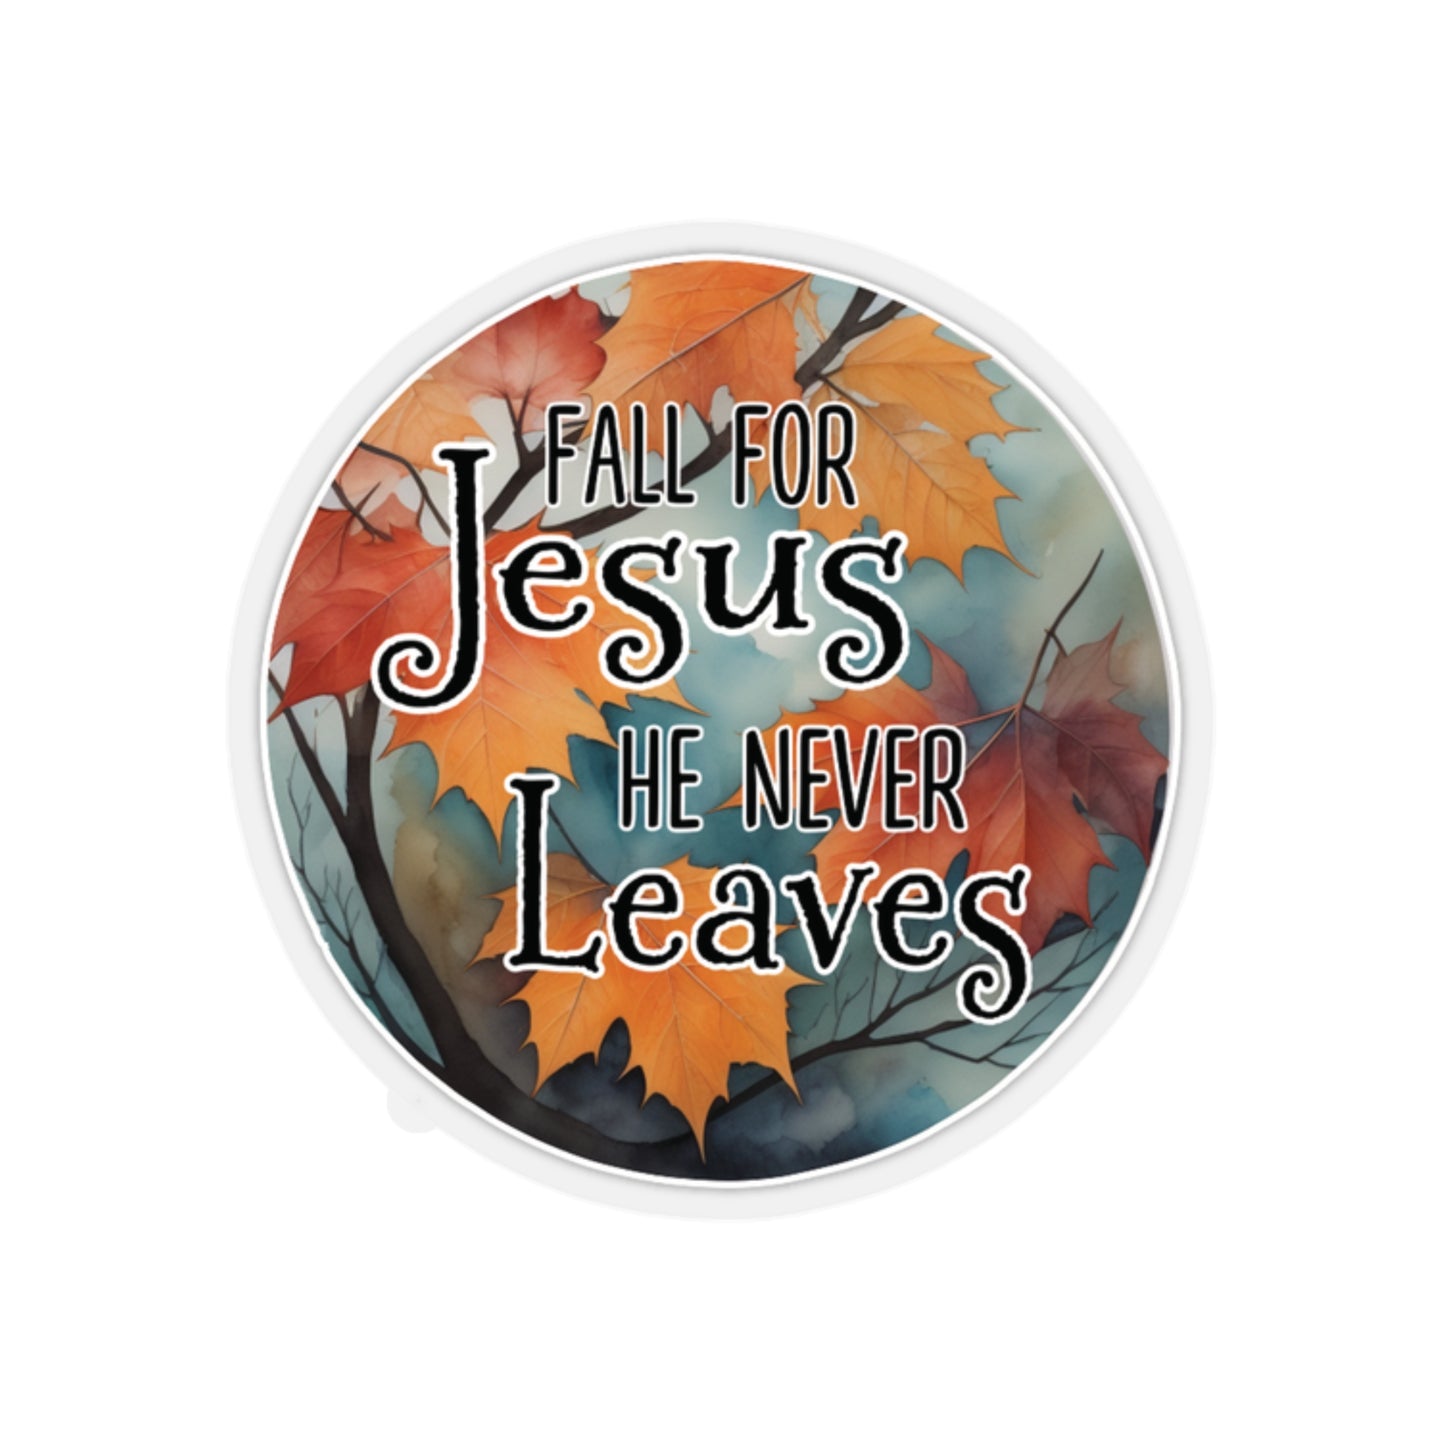 Fall for Jesus Sticker Bright Colors | Fun Stickers | Happy Stickers | Must Have Stickers | Laptop Stickers | Best Stickers | Gift Idea